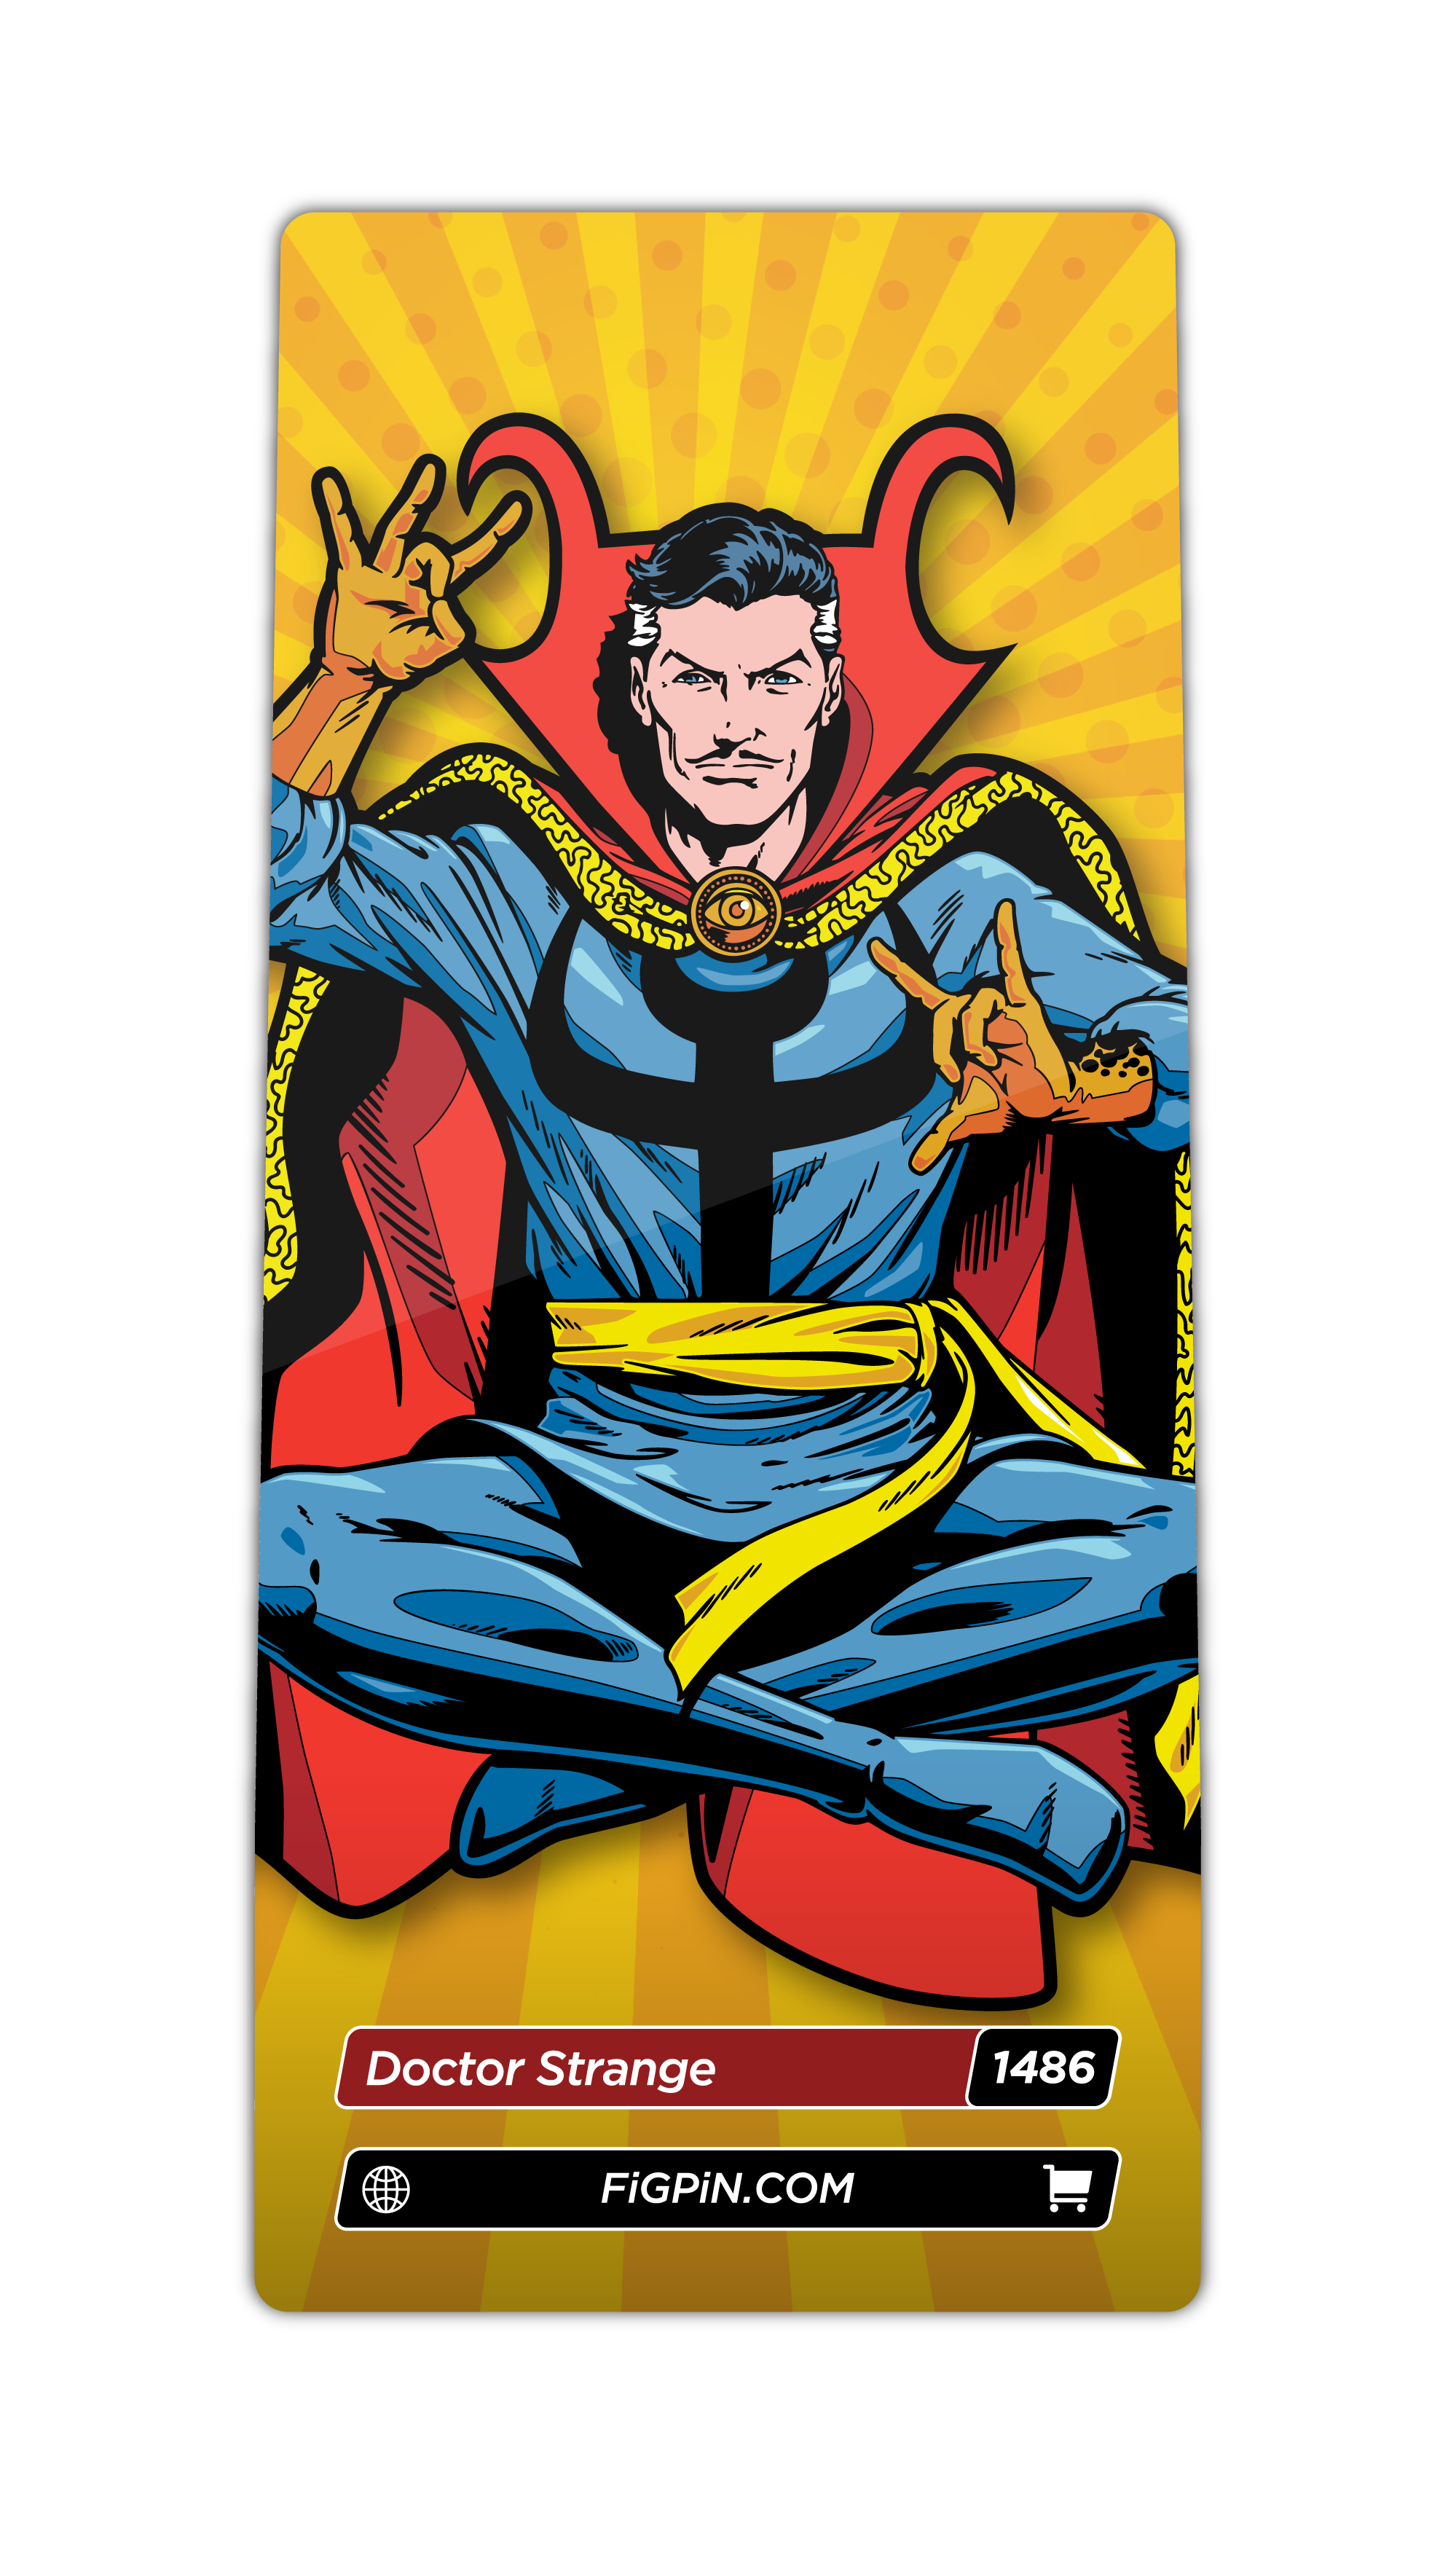 Character card of Marvel's Doctor Strange with text “Doctor Strange (1486)” and link to FiGPiN’s website